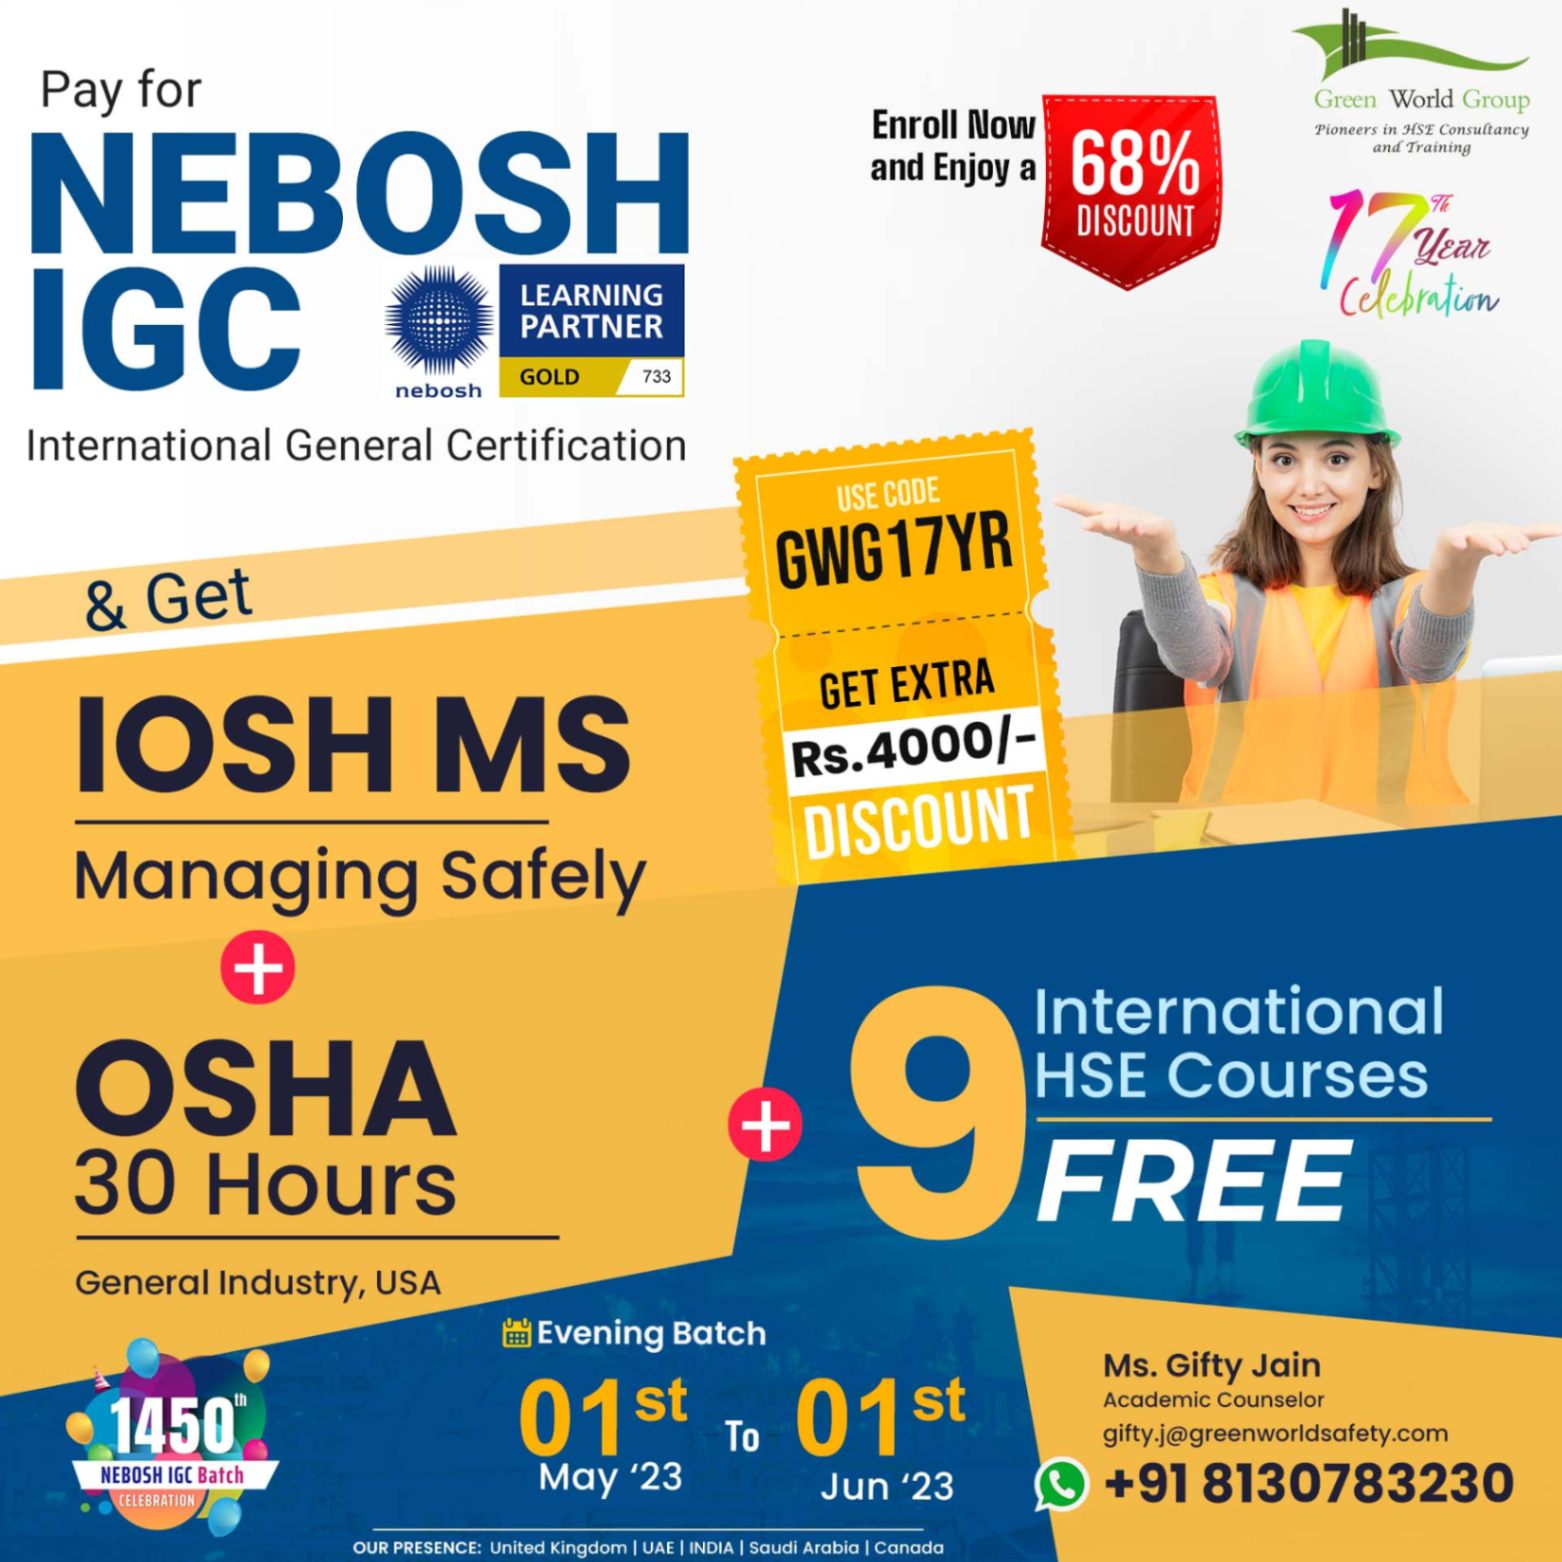  Develop your HSE skills with NEBOSH IGC!